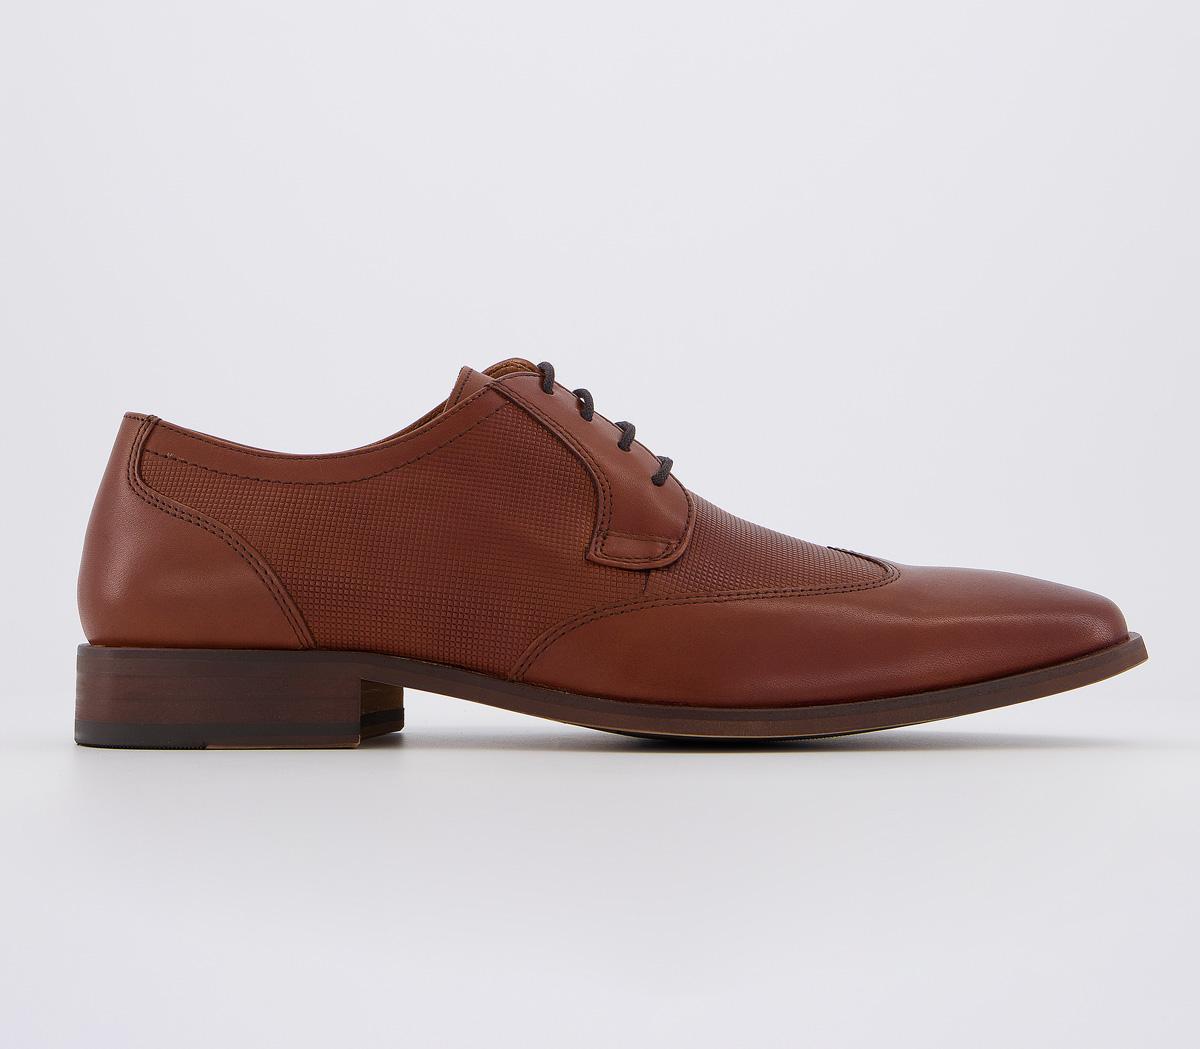 OFFICEMike Wingcap Derby ShoesTan Leather